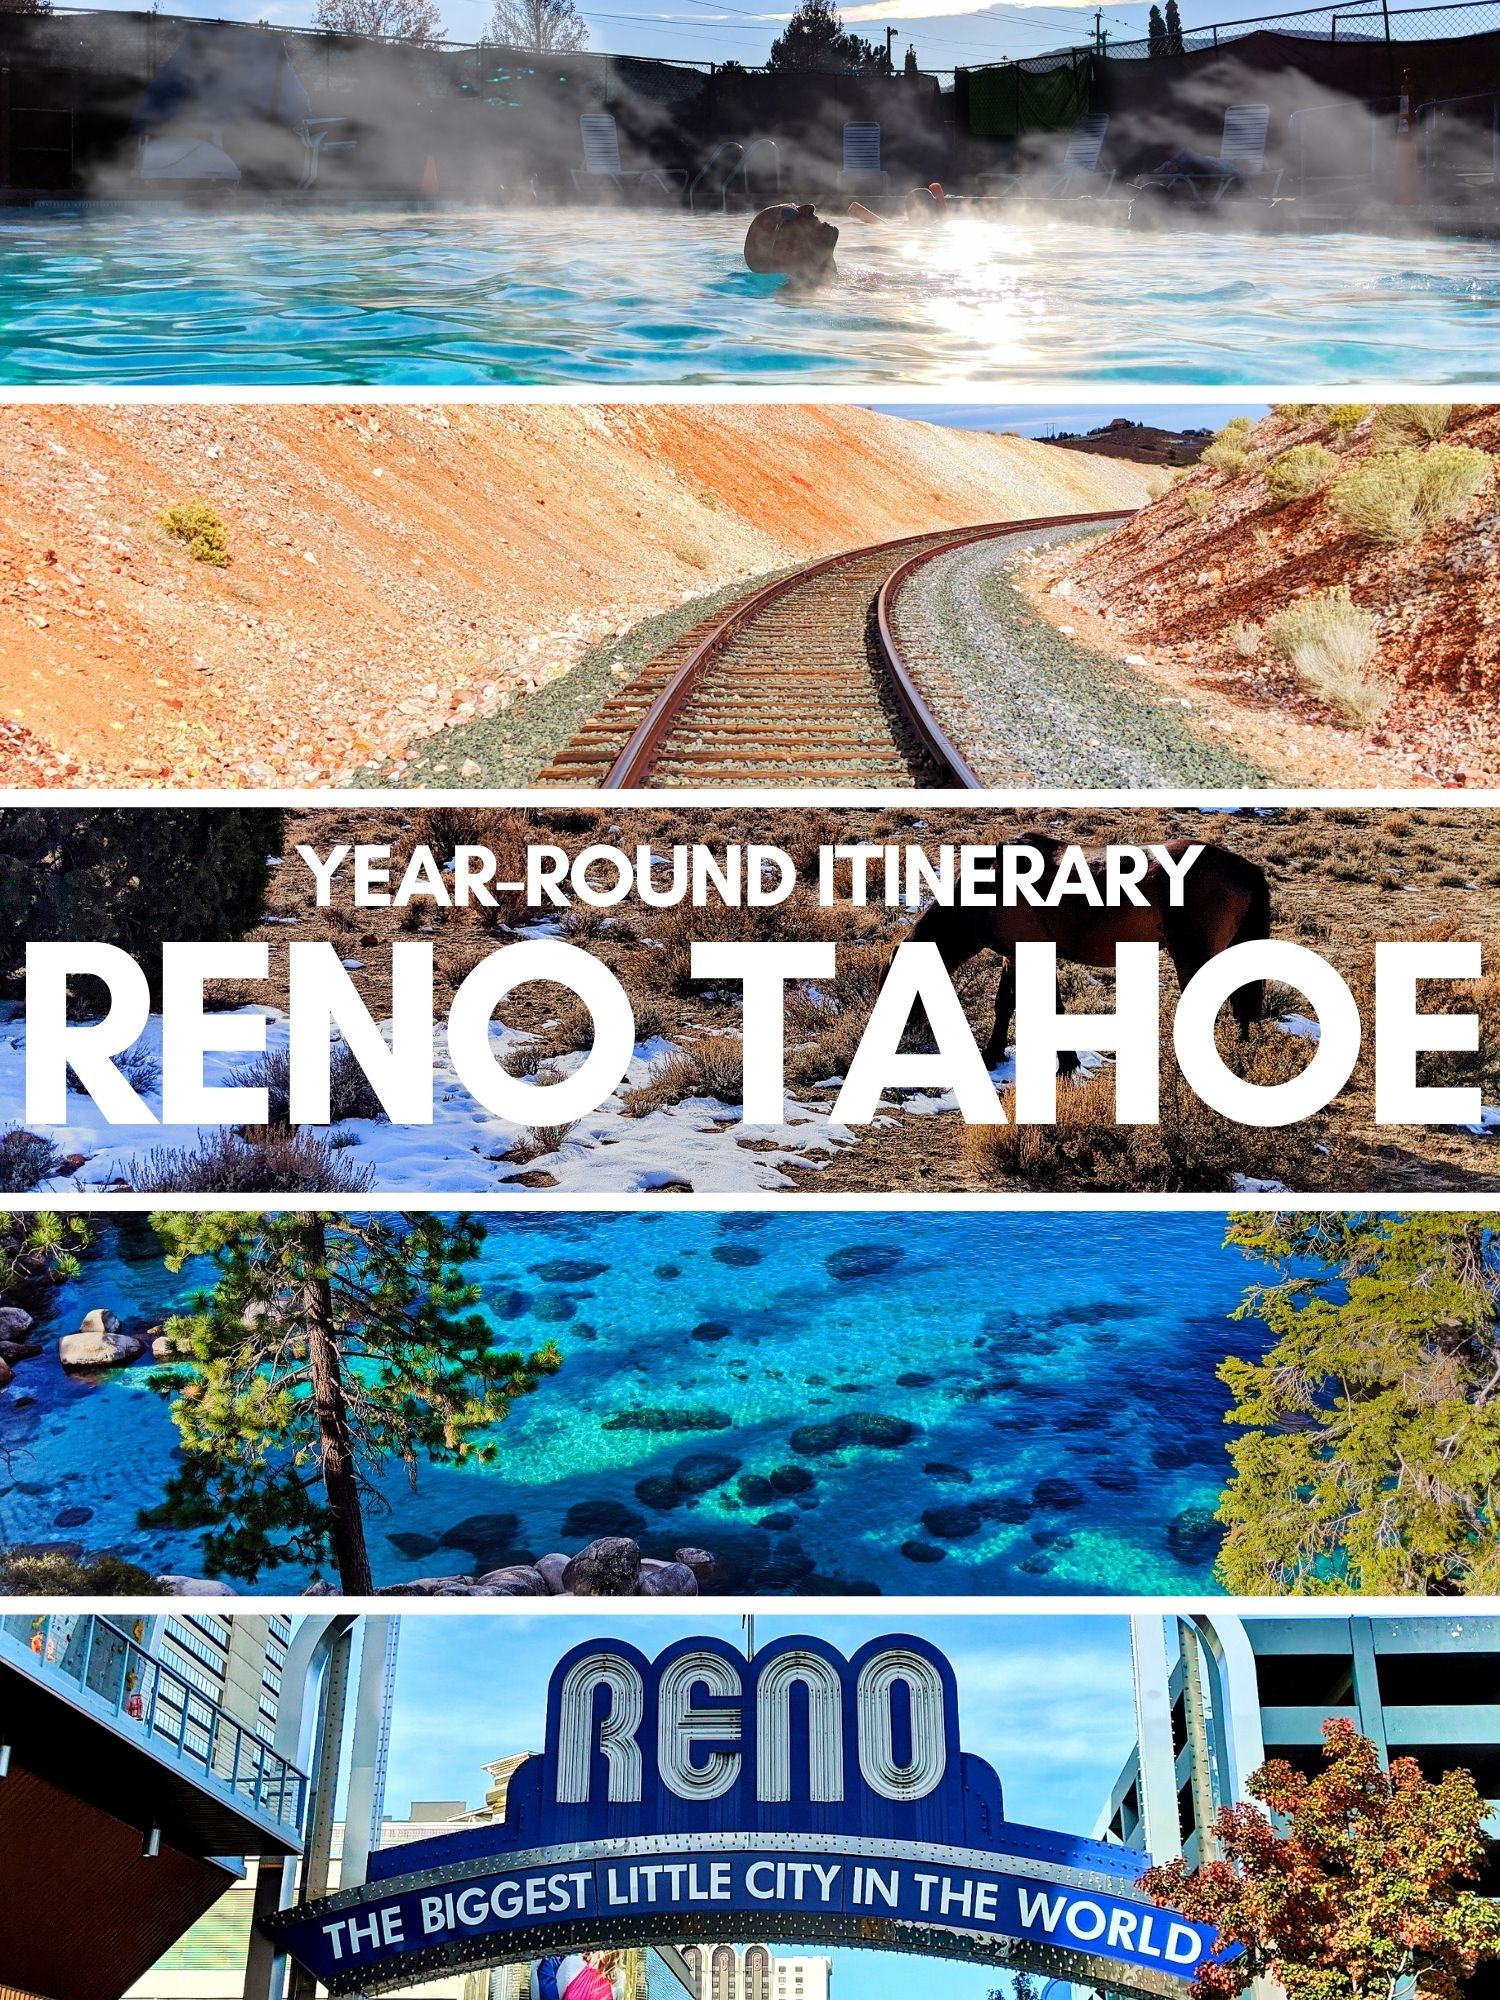 This Reno Tahoe itinerary is an ideal plan for visiting Lake Tahoe, Carson City and the Old West towns of Nevada's Silver Country. Things to do include hiking at Lake Tahoe, rail biking, historic sites and fascinating museums.